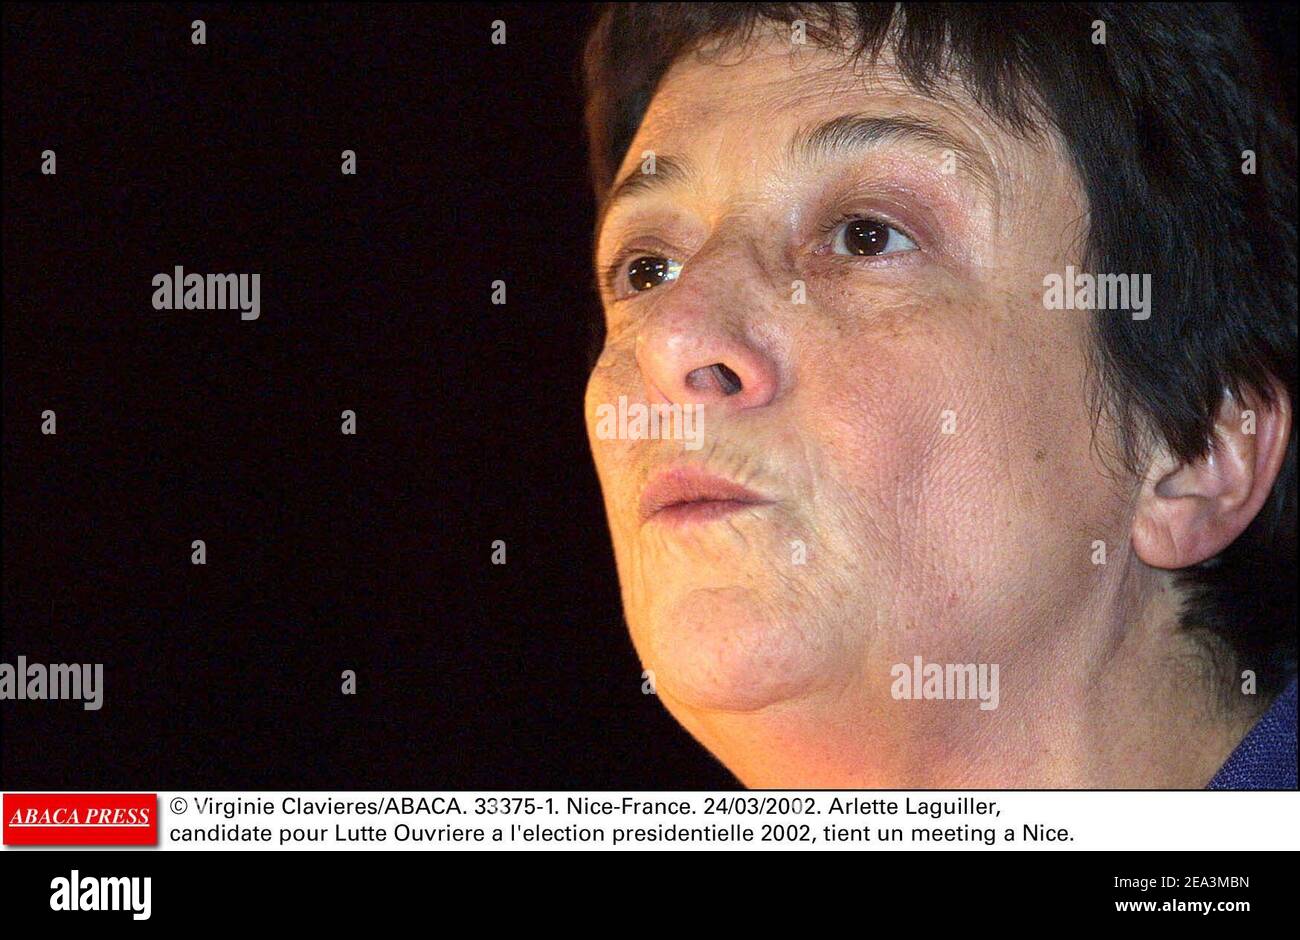 © Virginie Clavieres/ABACA. 33375-1. Nice-France. 24/03/2002. Arlette Laguiller, candidate pour Lutte Ouvriere a l'election presidentielle 2002, tient un meeting a Nice. Stock Photo